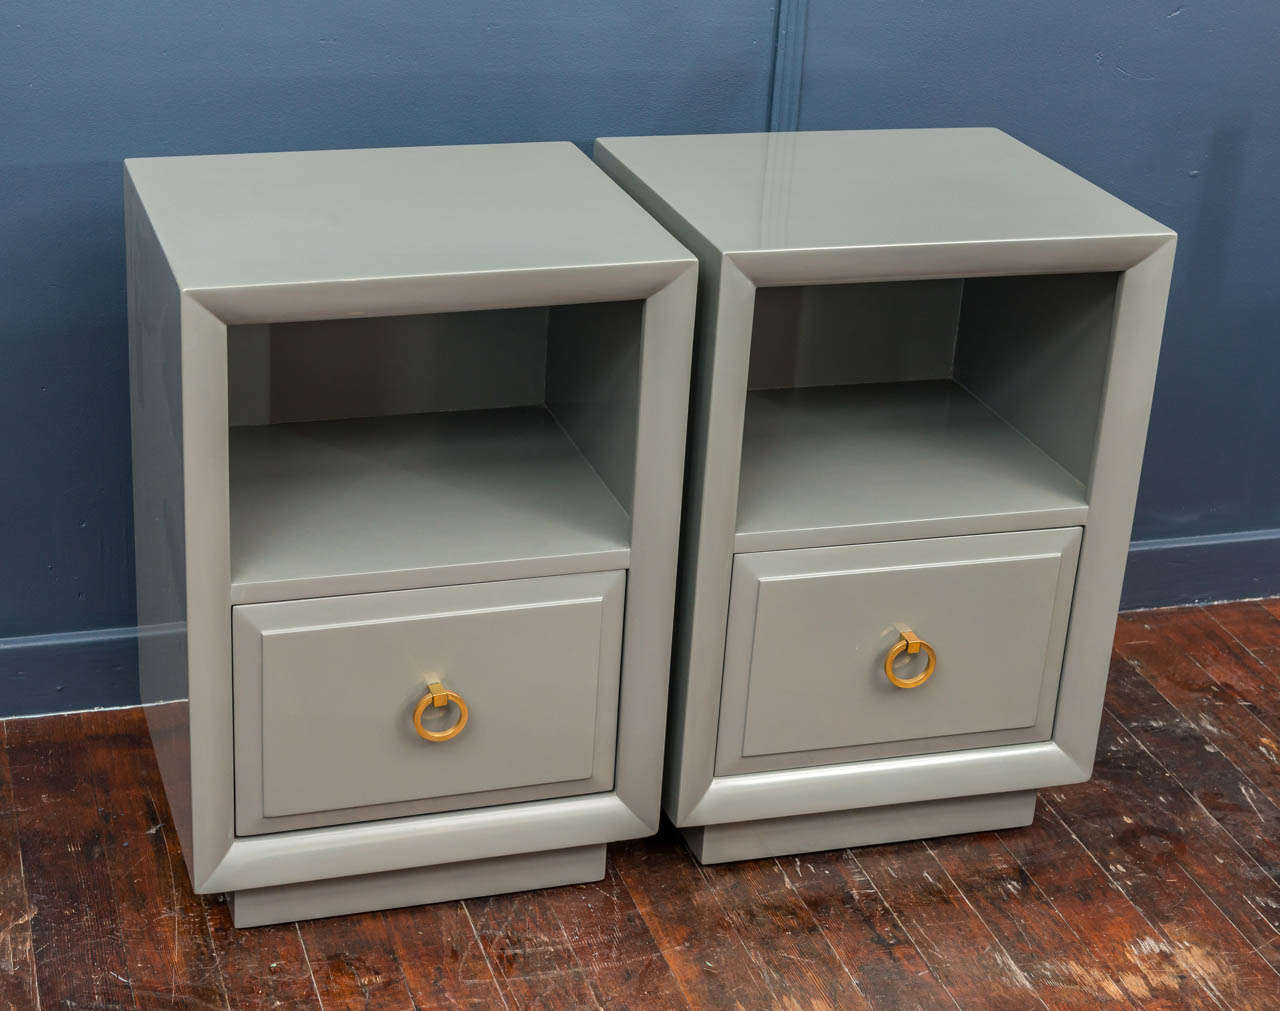 Pair of Widdicomb heather gray lacquer nightstands or end tables with polished brass articulating pulls.